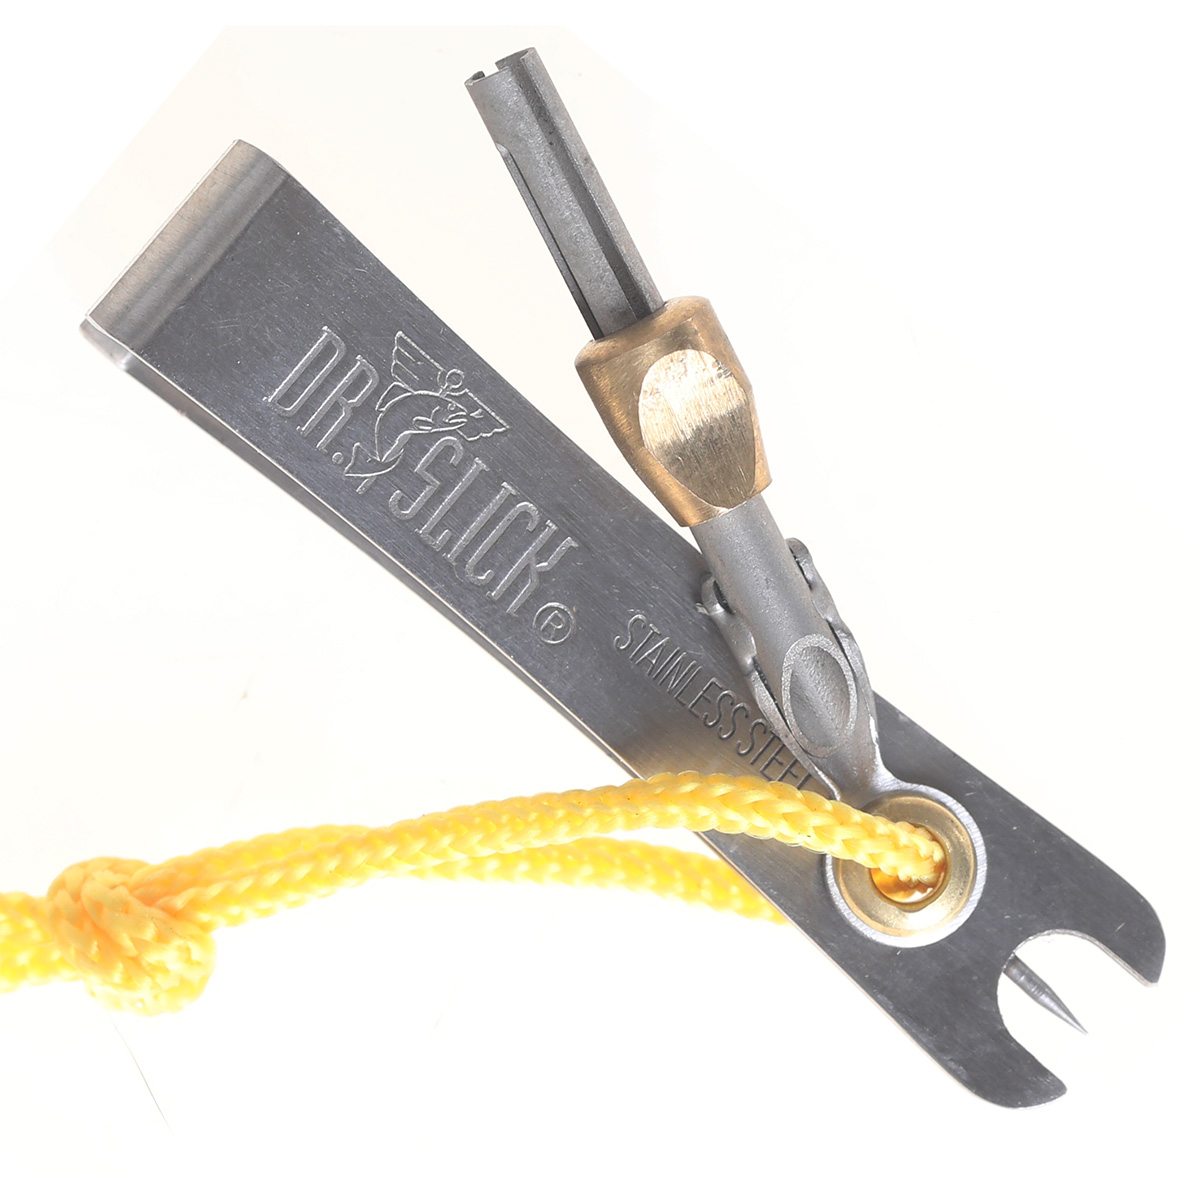 Dr Slick Satin Nipper With Knot Tyer